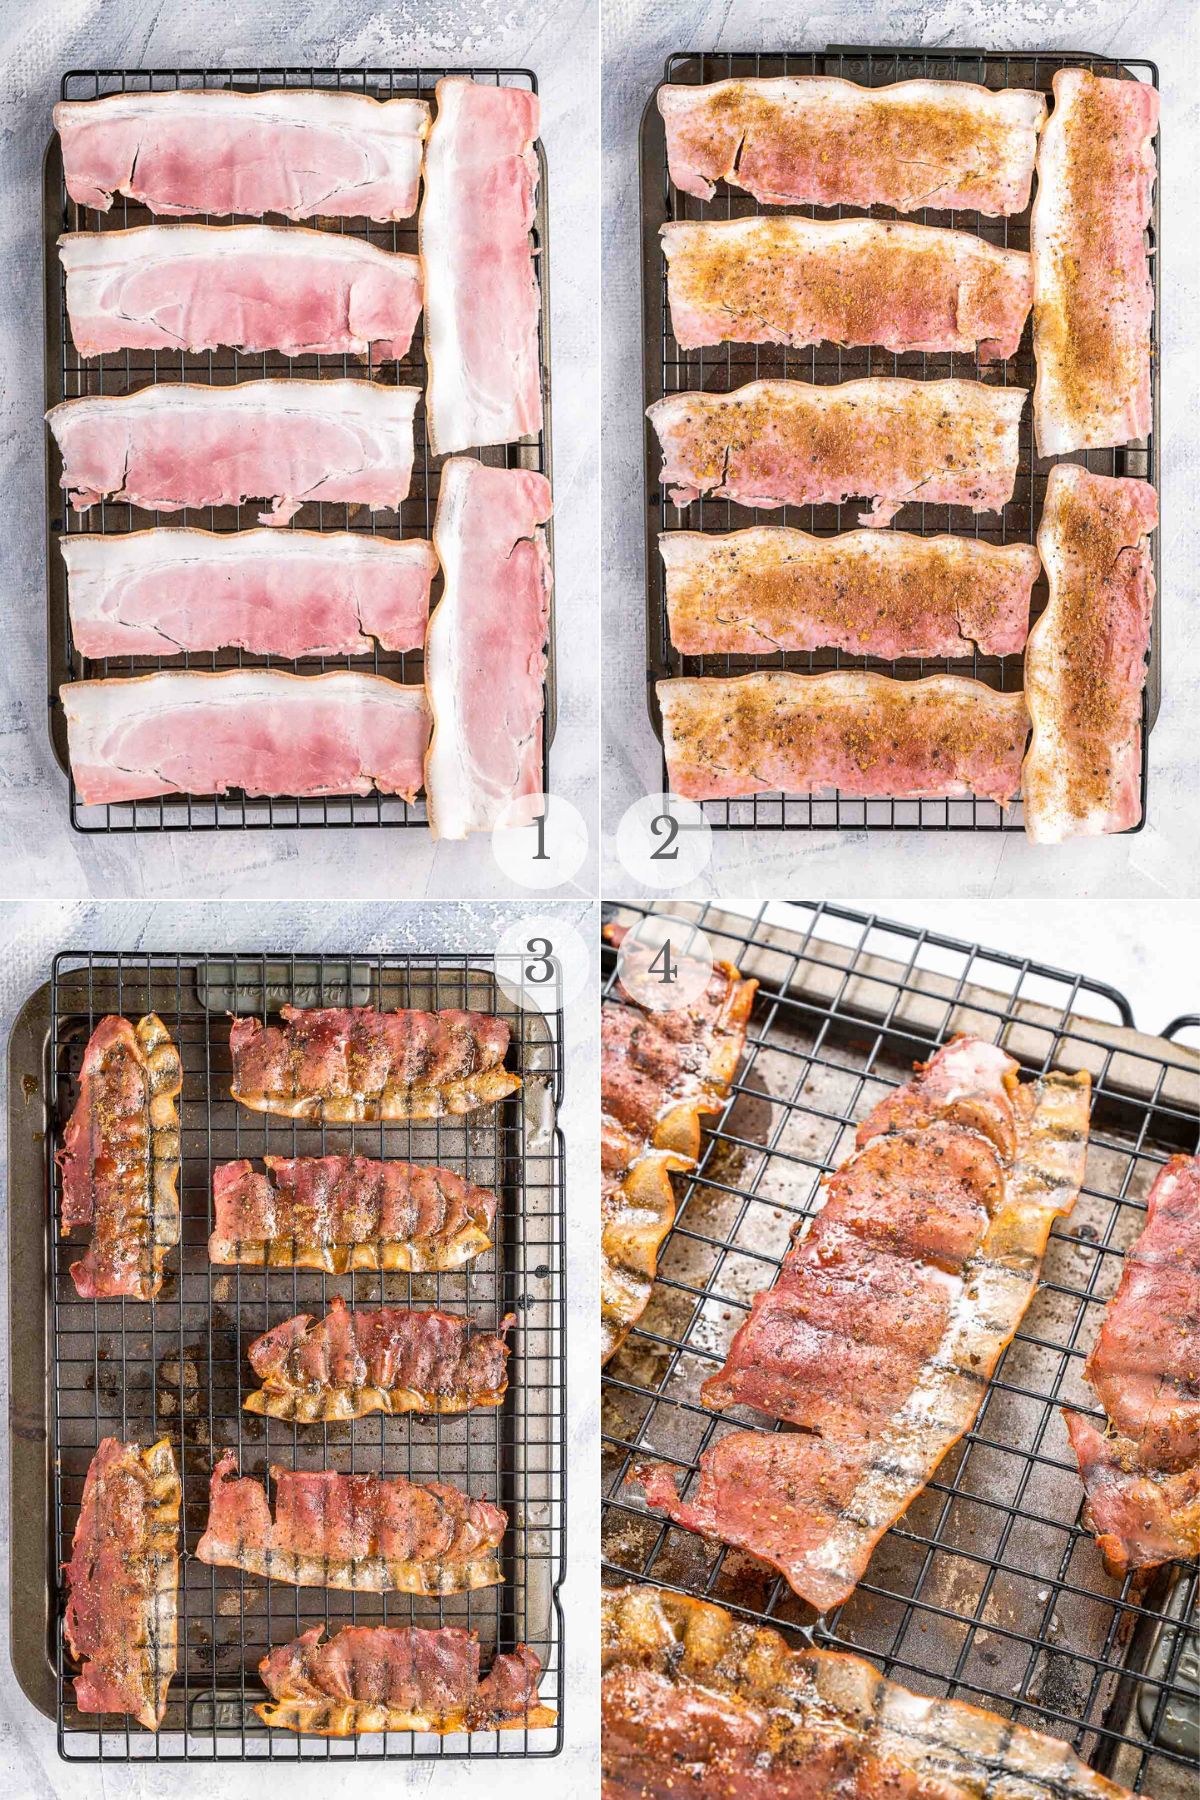 candied bacon recipe steps 1-4.